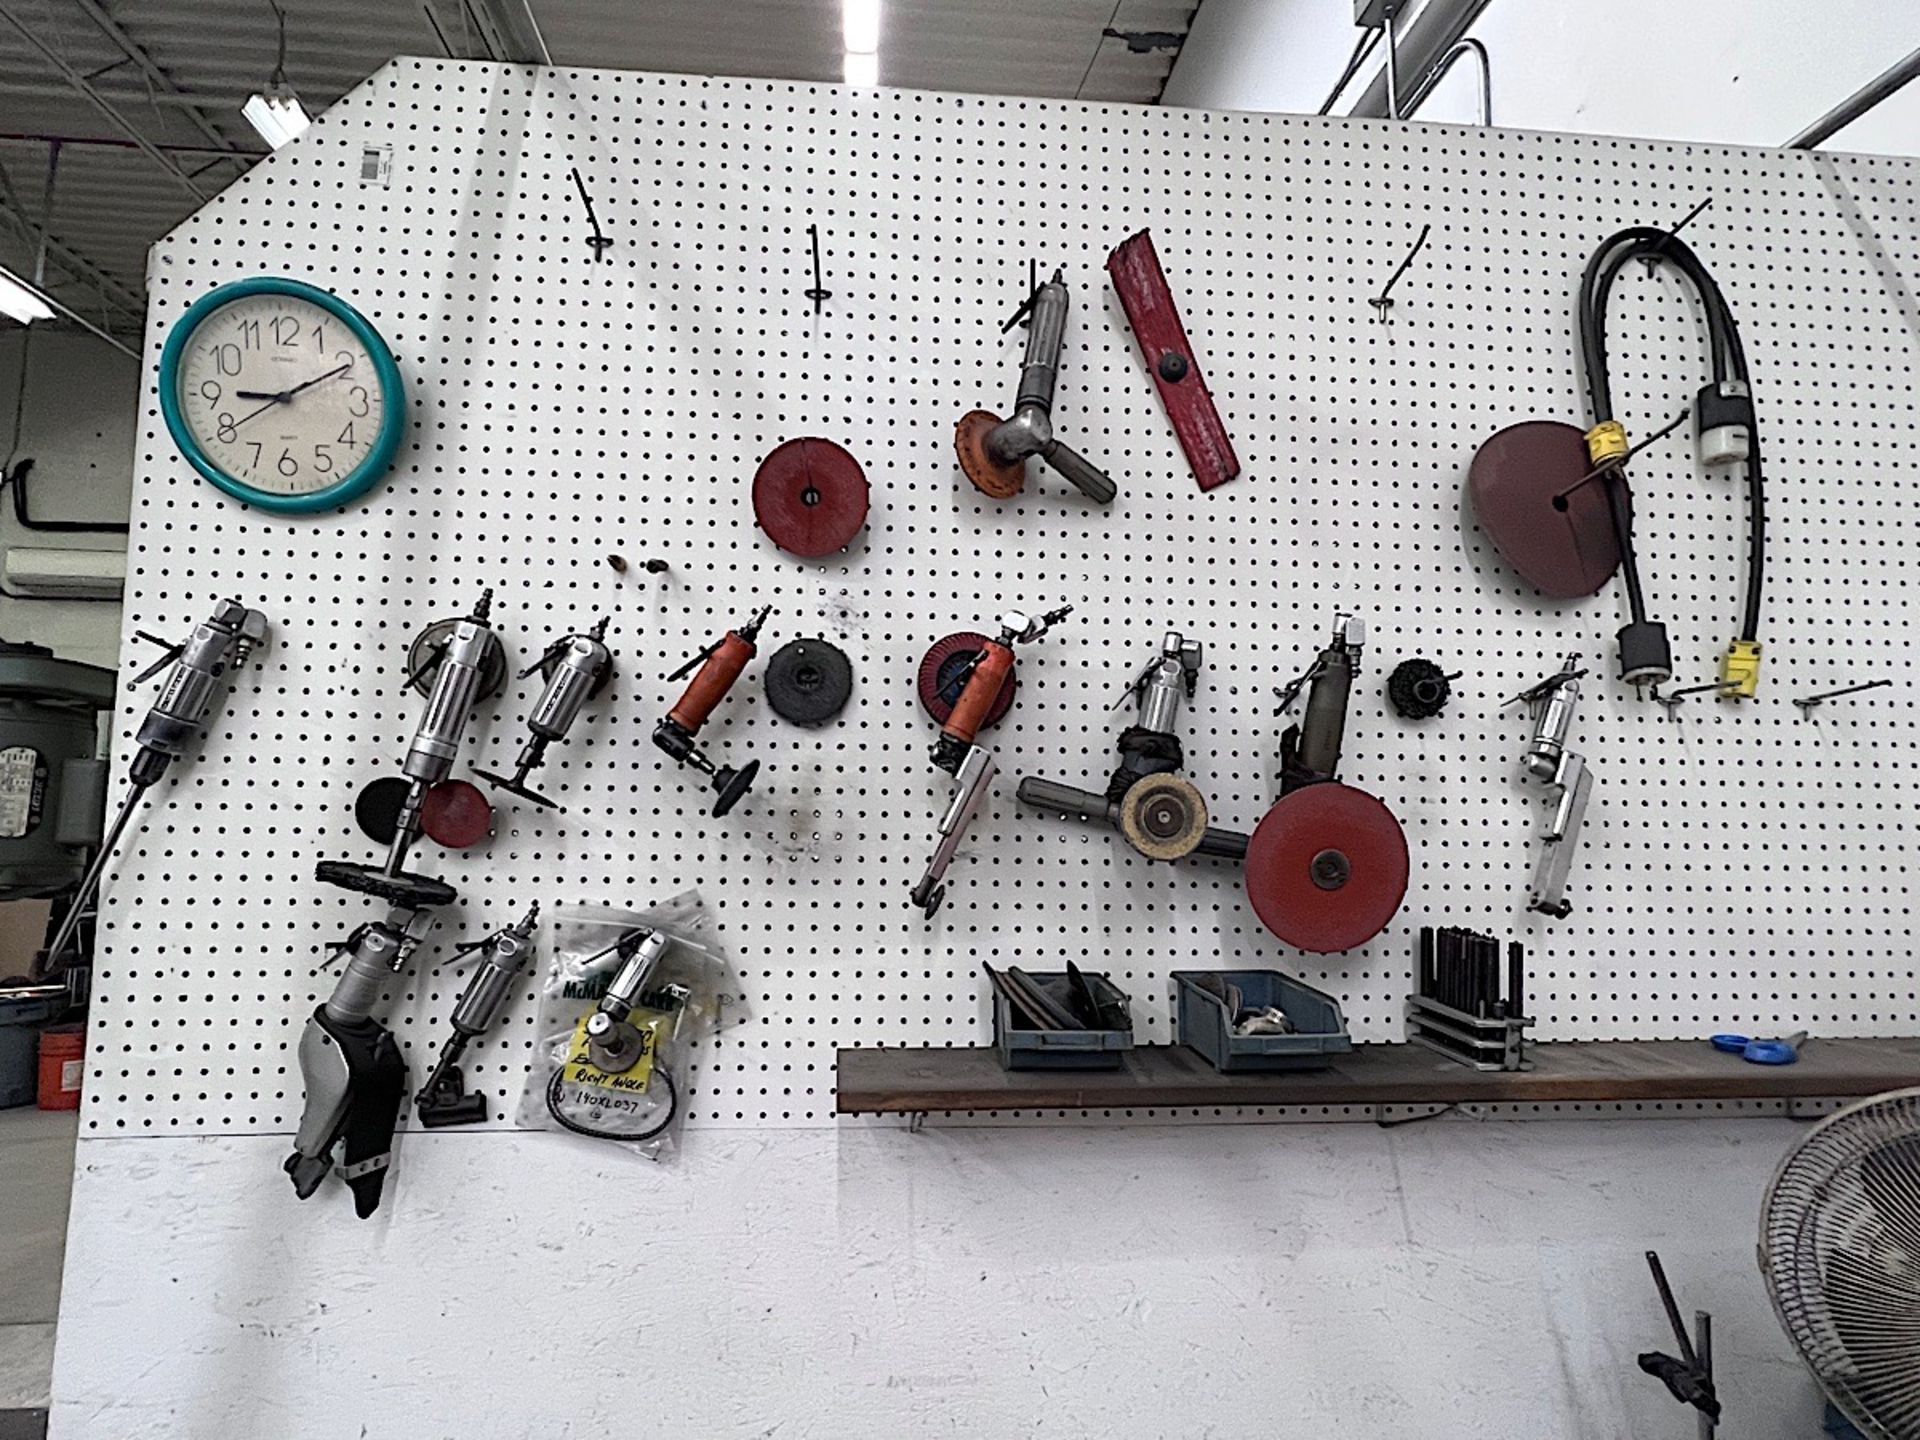 LOT OF PNEUMATIC TOOLS ON WALL